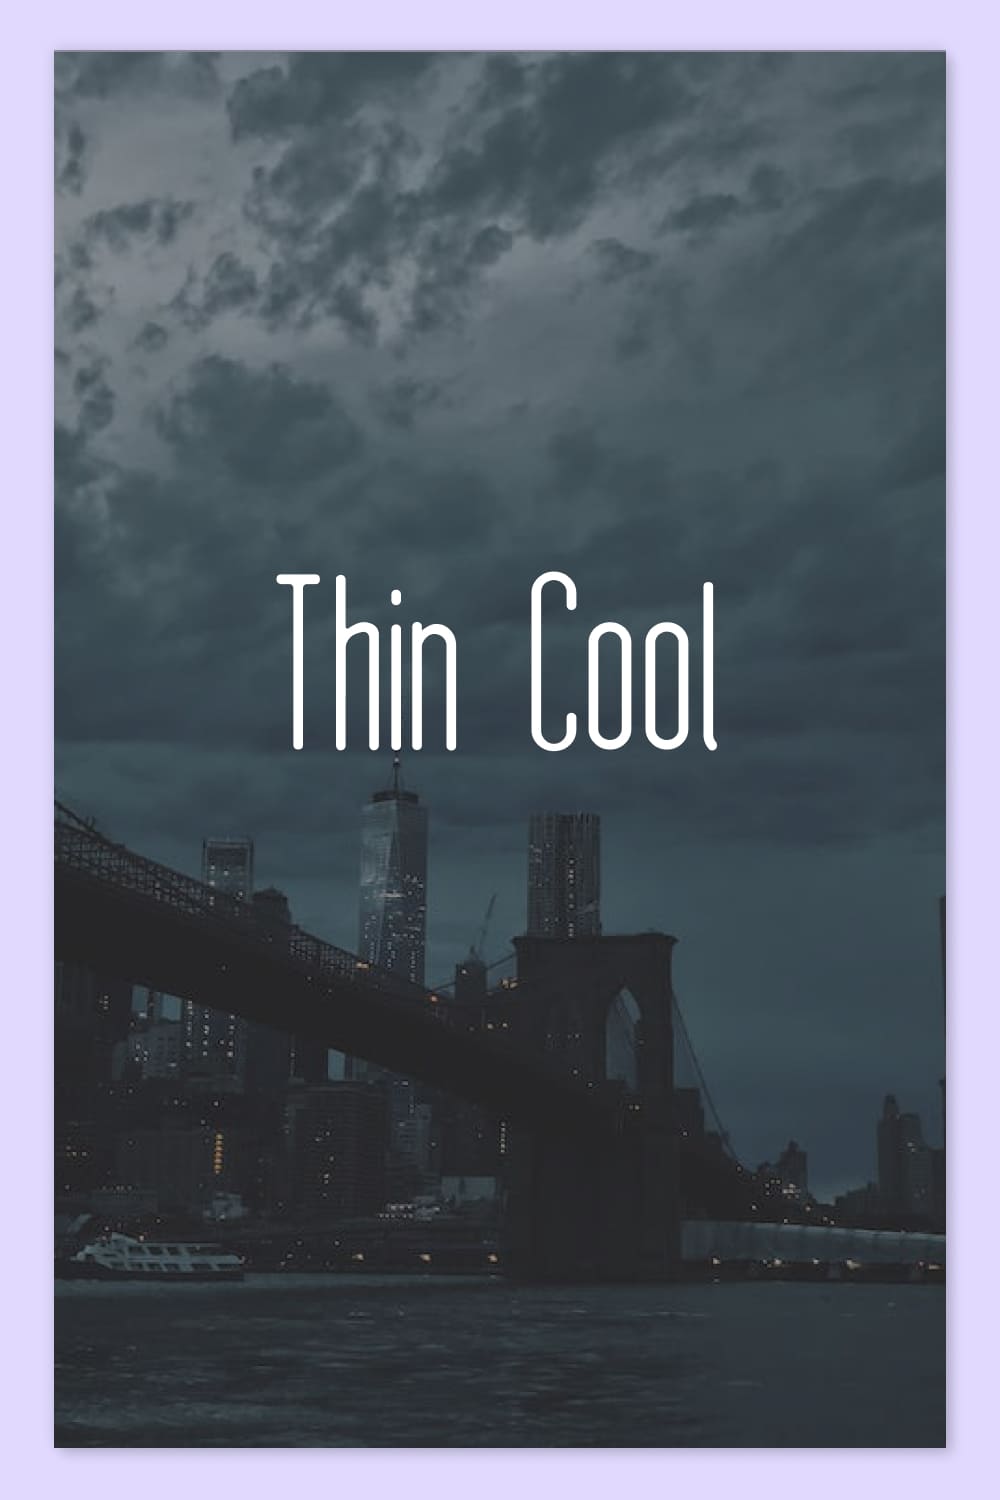 An example of a Thin Cool font against a photo of the Brooklyn Bridge.